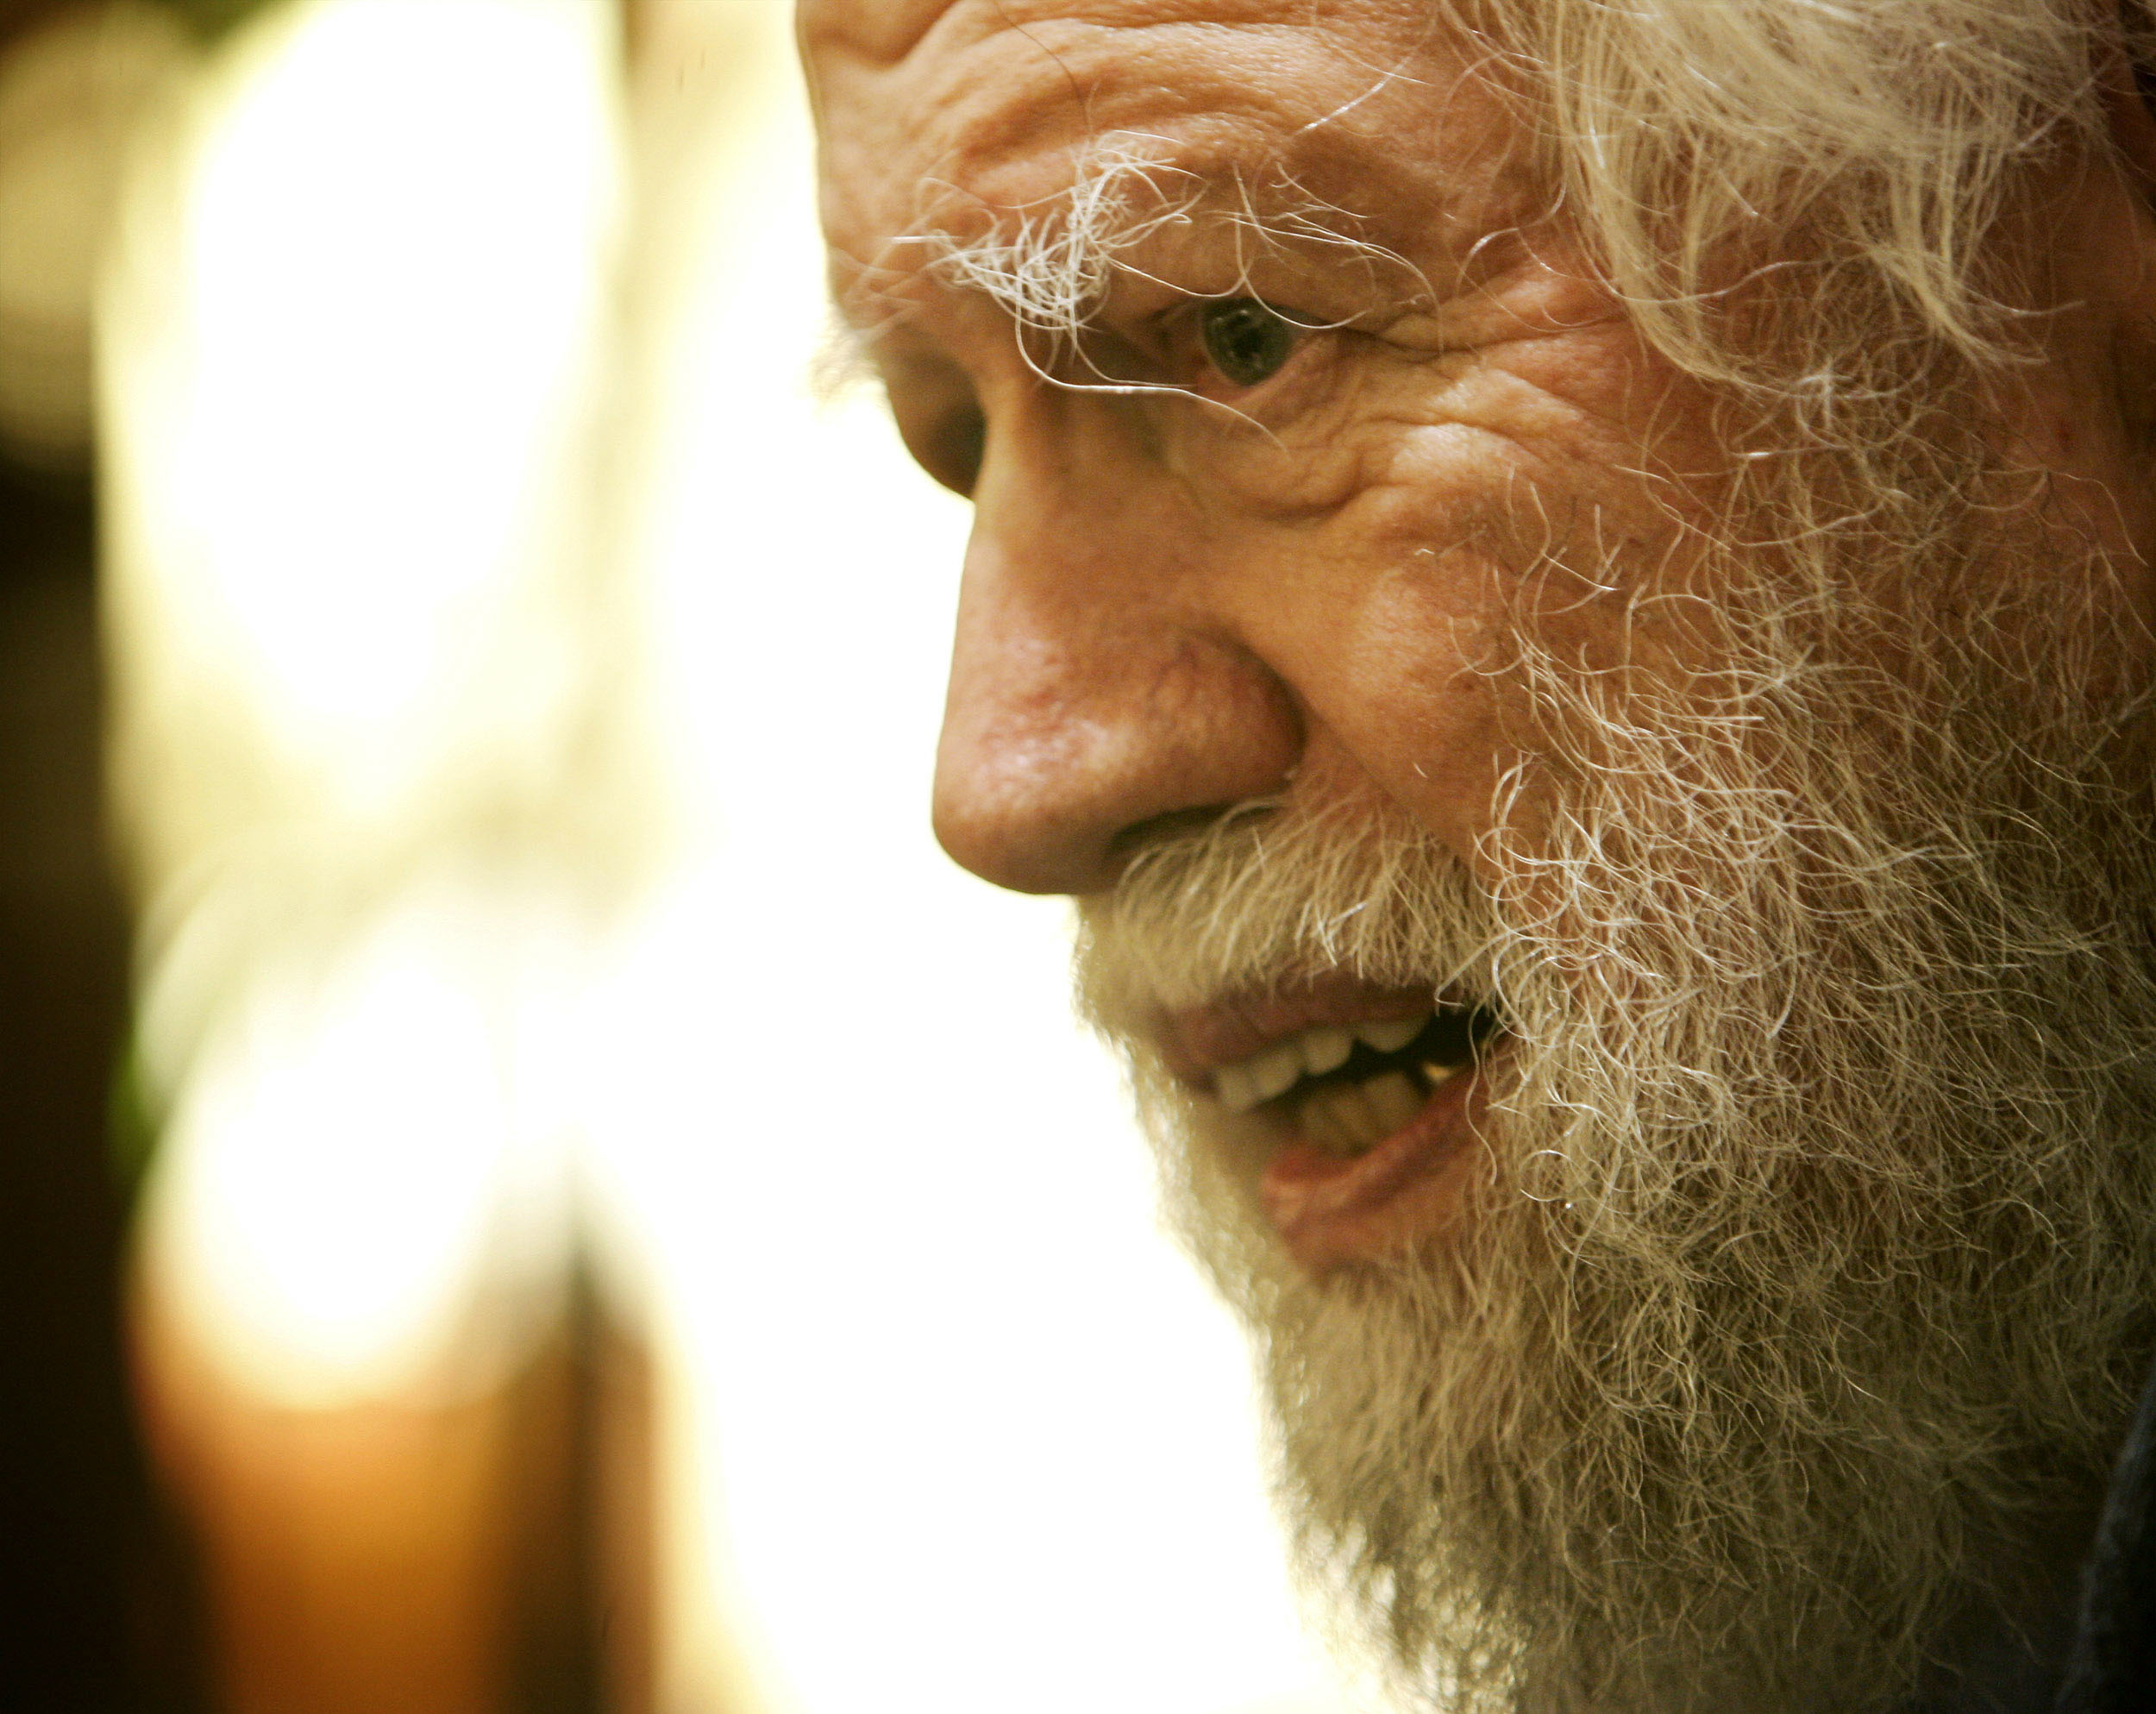 Alexander Shulgin, pharmacologist and chemist known for his creation of new psychoactive chemicals, is interviewed in Cambridge, Mass., on Dec. 1, 2005 (Brian Snyder—Reuters)